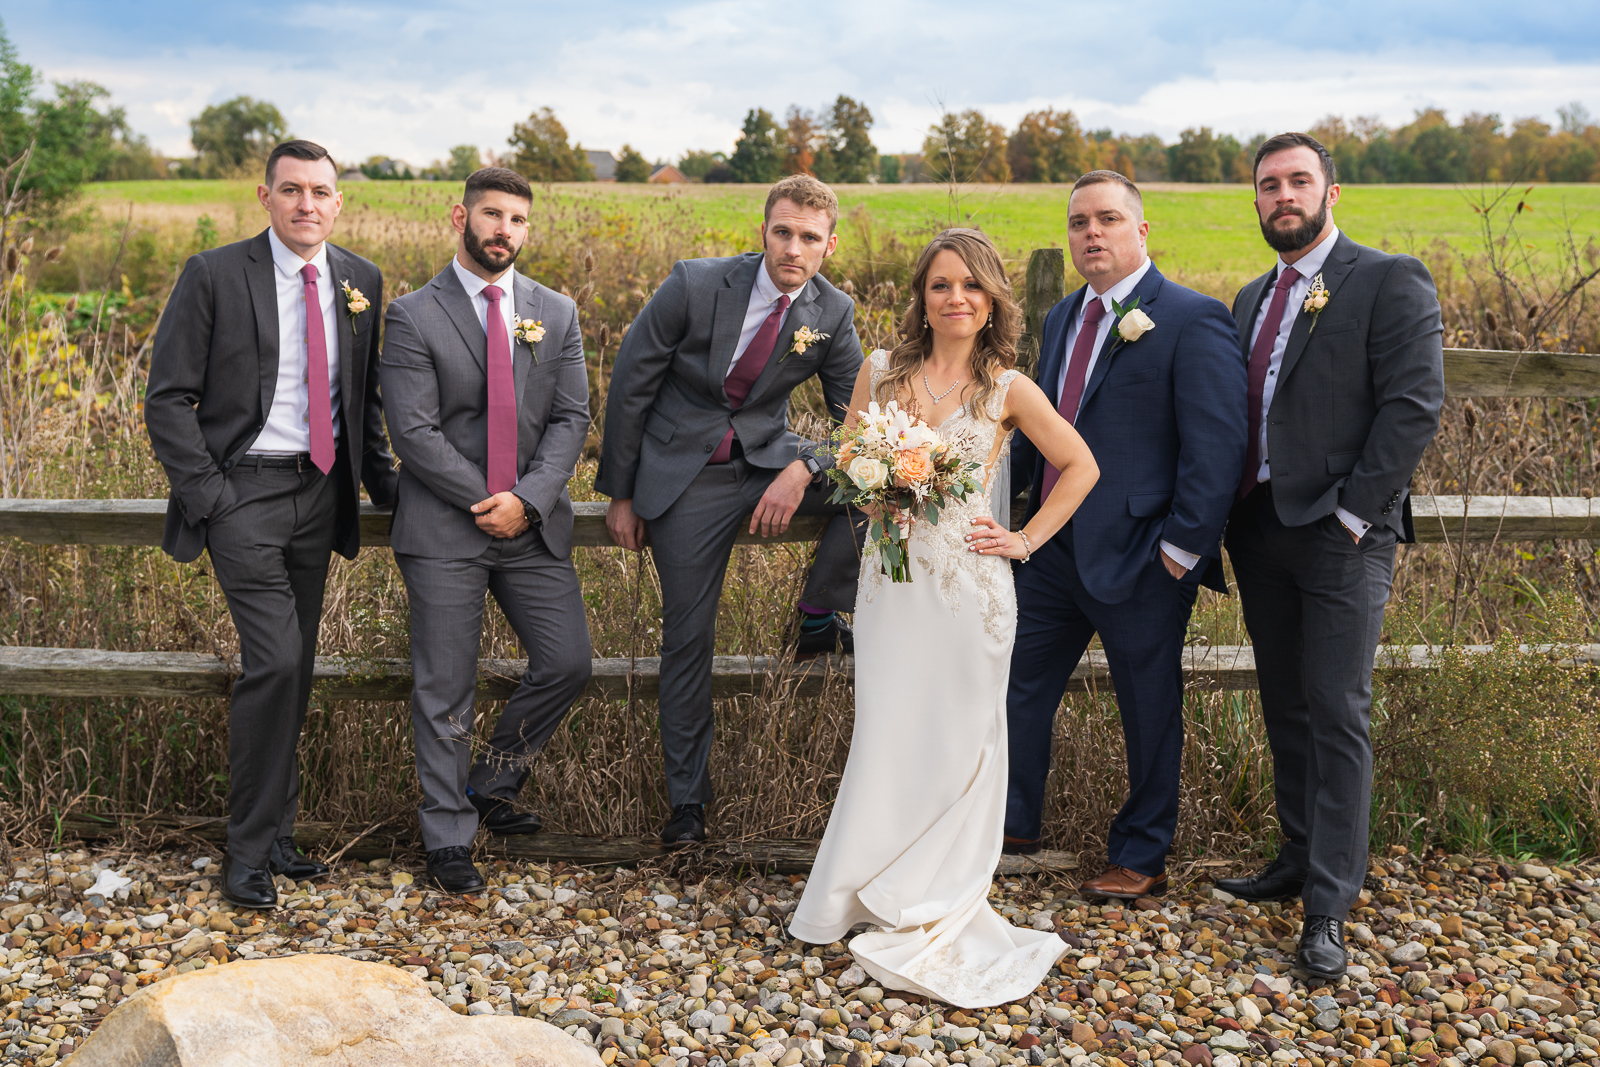 Bride with groomsmen, bridal party portrait, field, nature, fence, fall wedding, rustic outdoor wedding ceremony at White Birch Barn